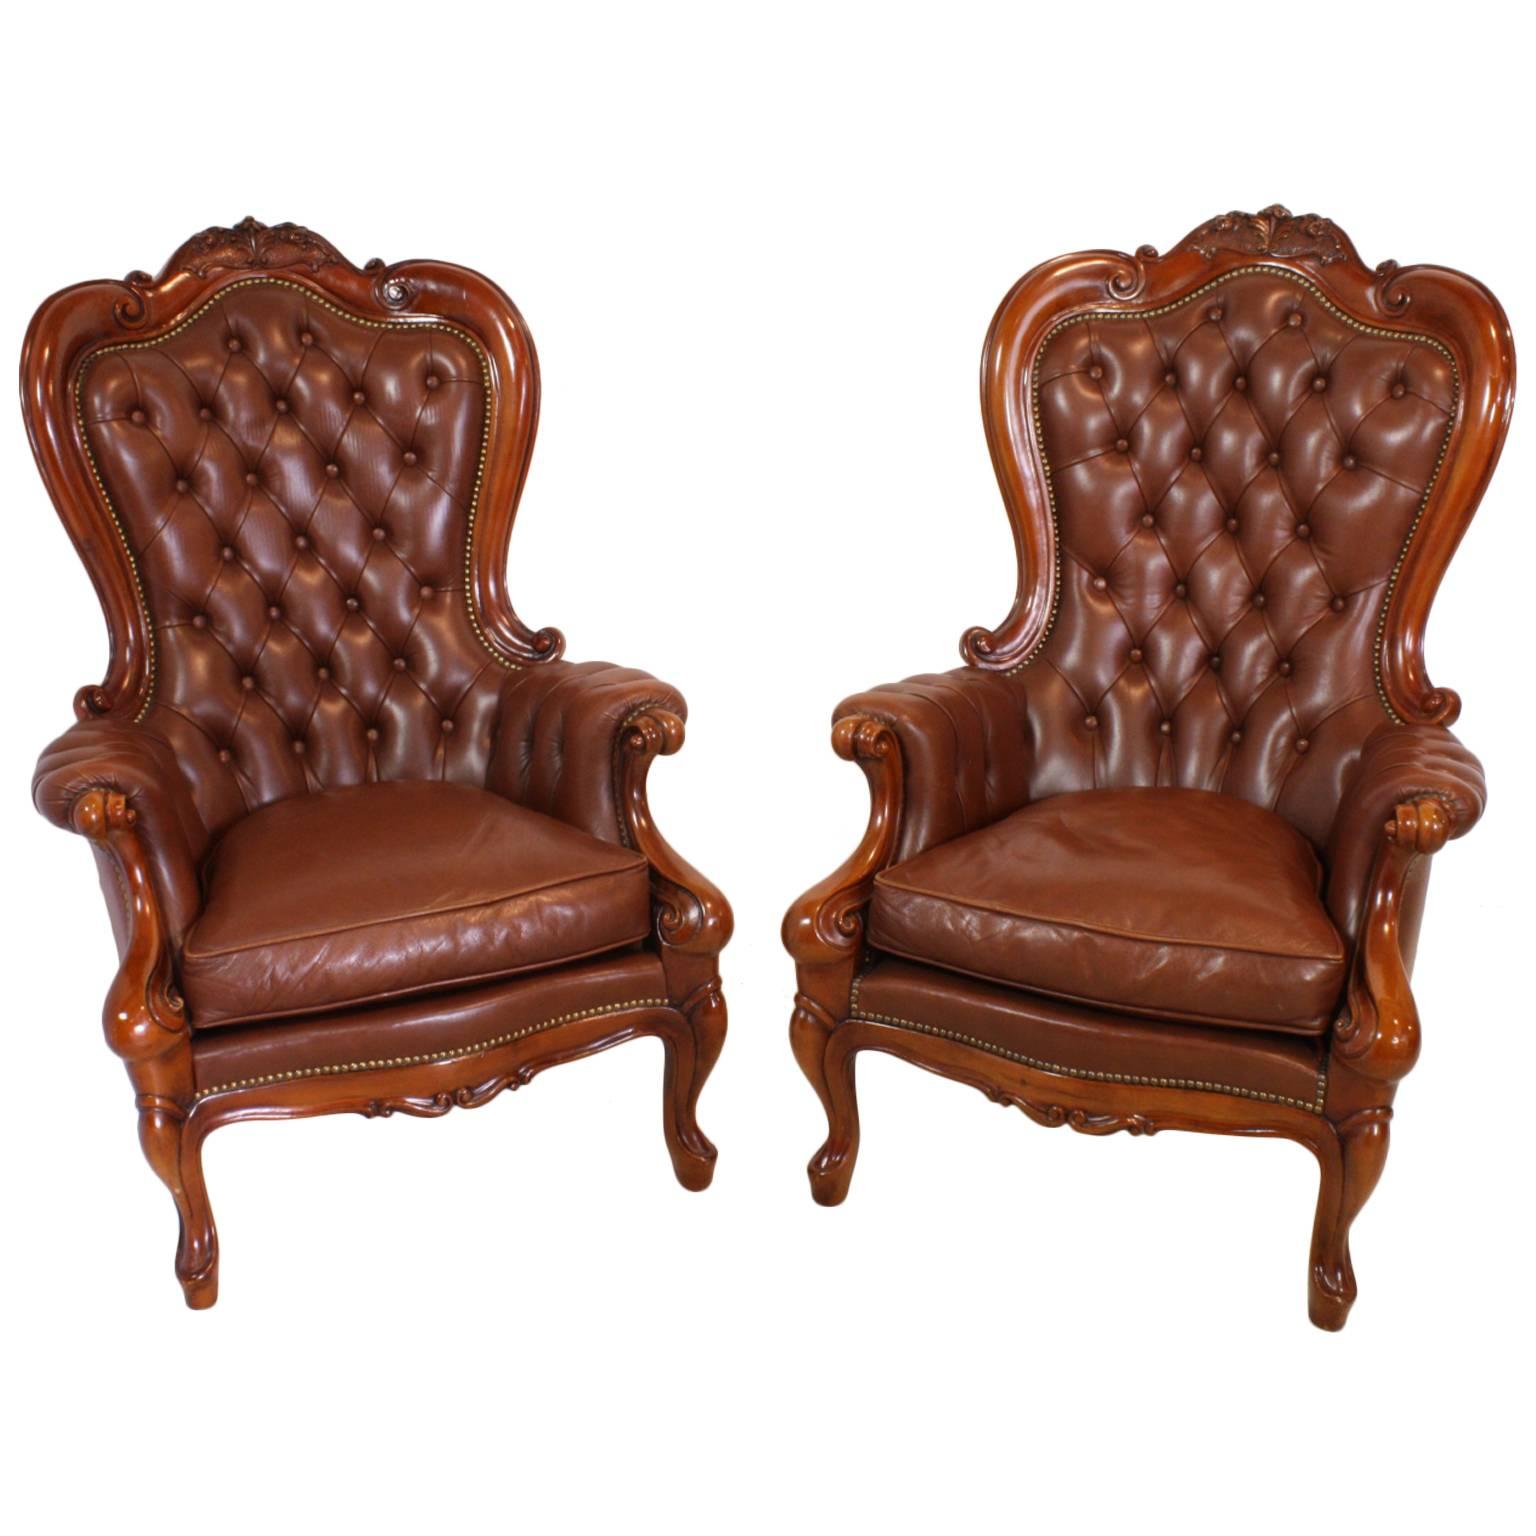 Set of Two Victorian Style Mahogany Leather Chairs, circa 1920